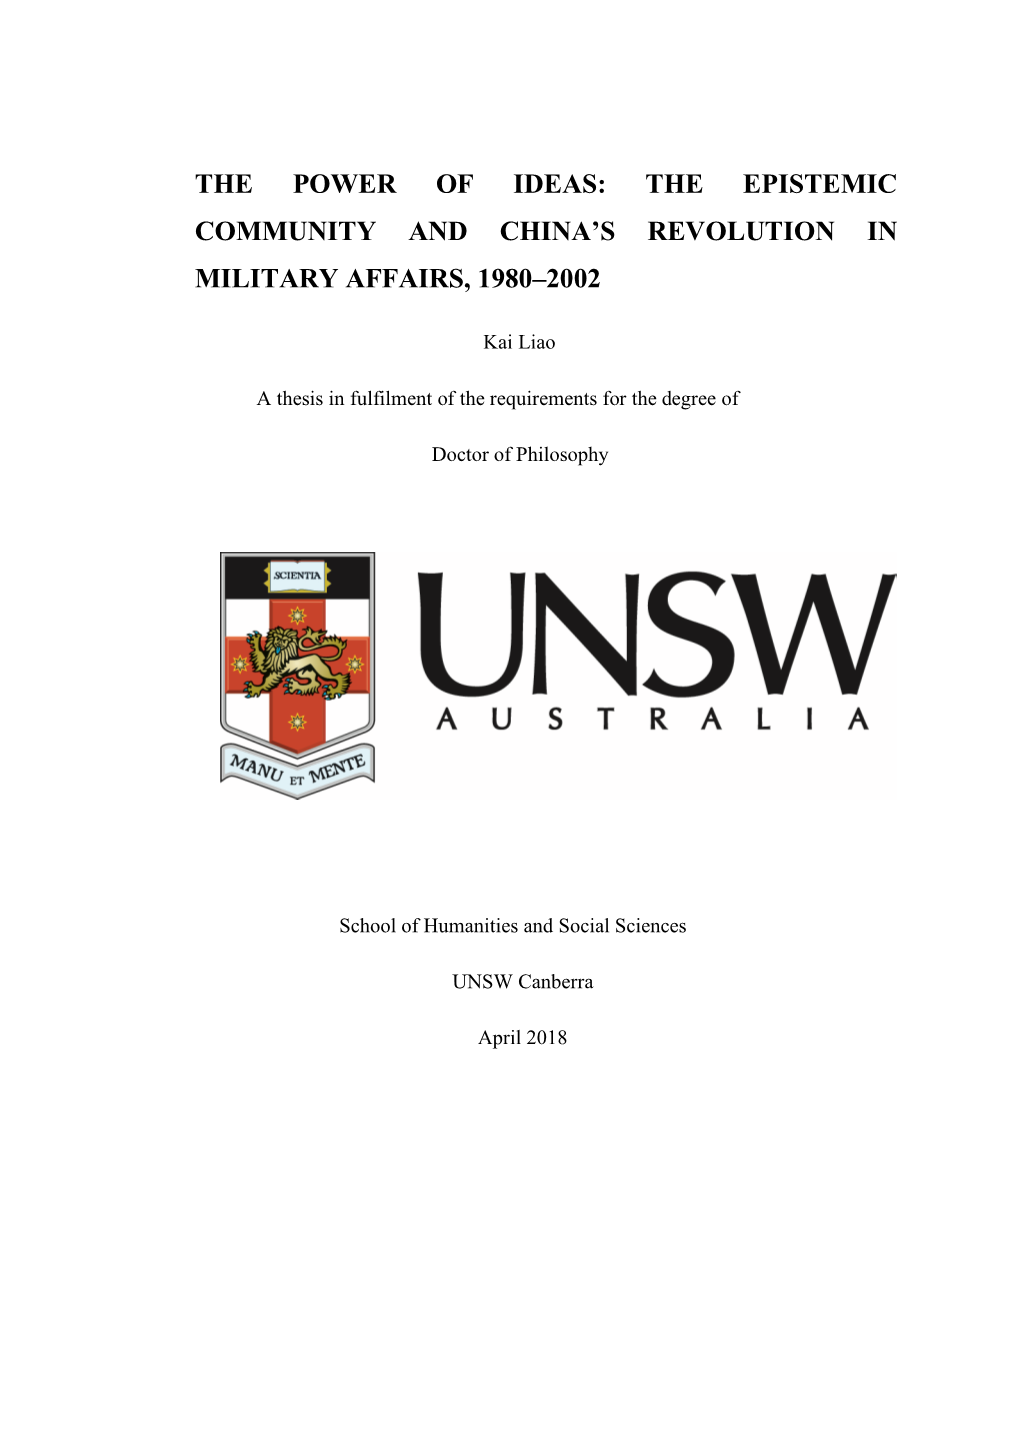 The Epistemic Community and China's Revolution in Military Affairs, 1980–2002